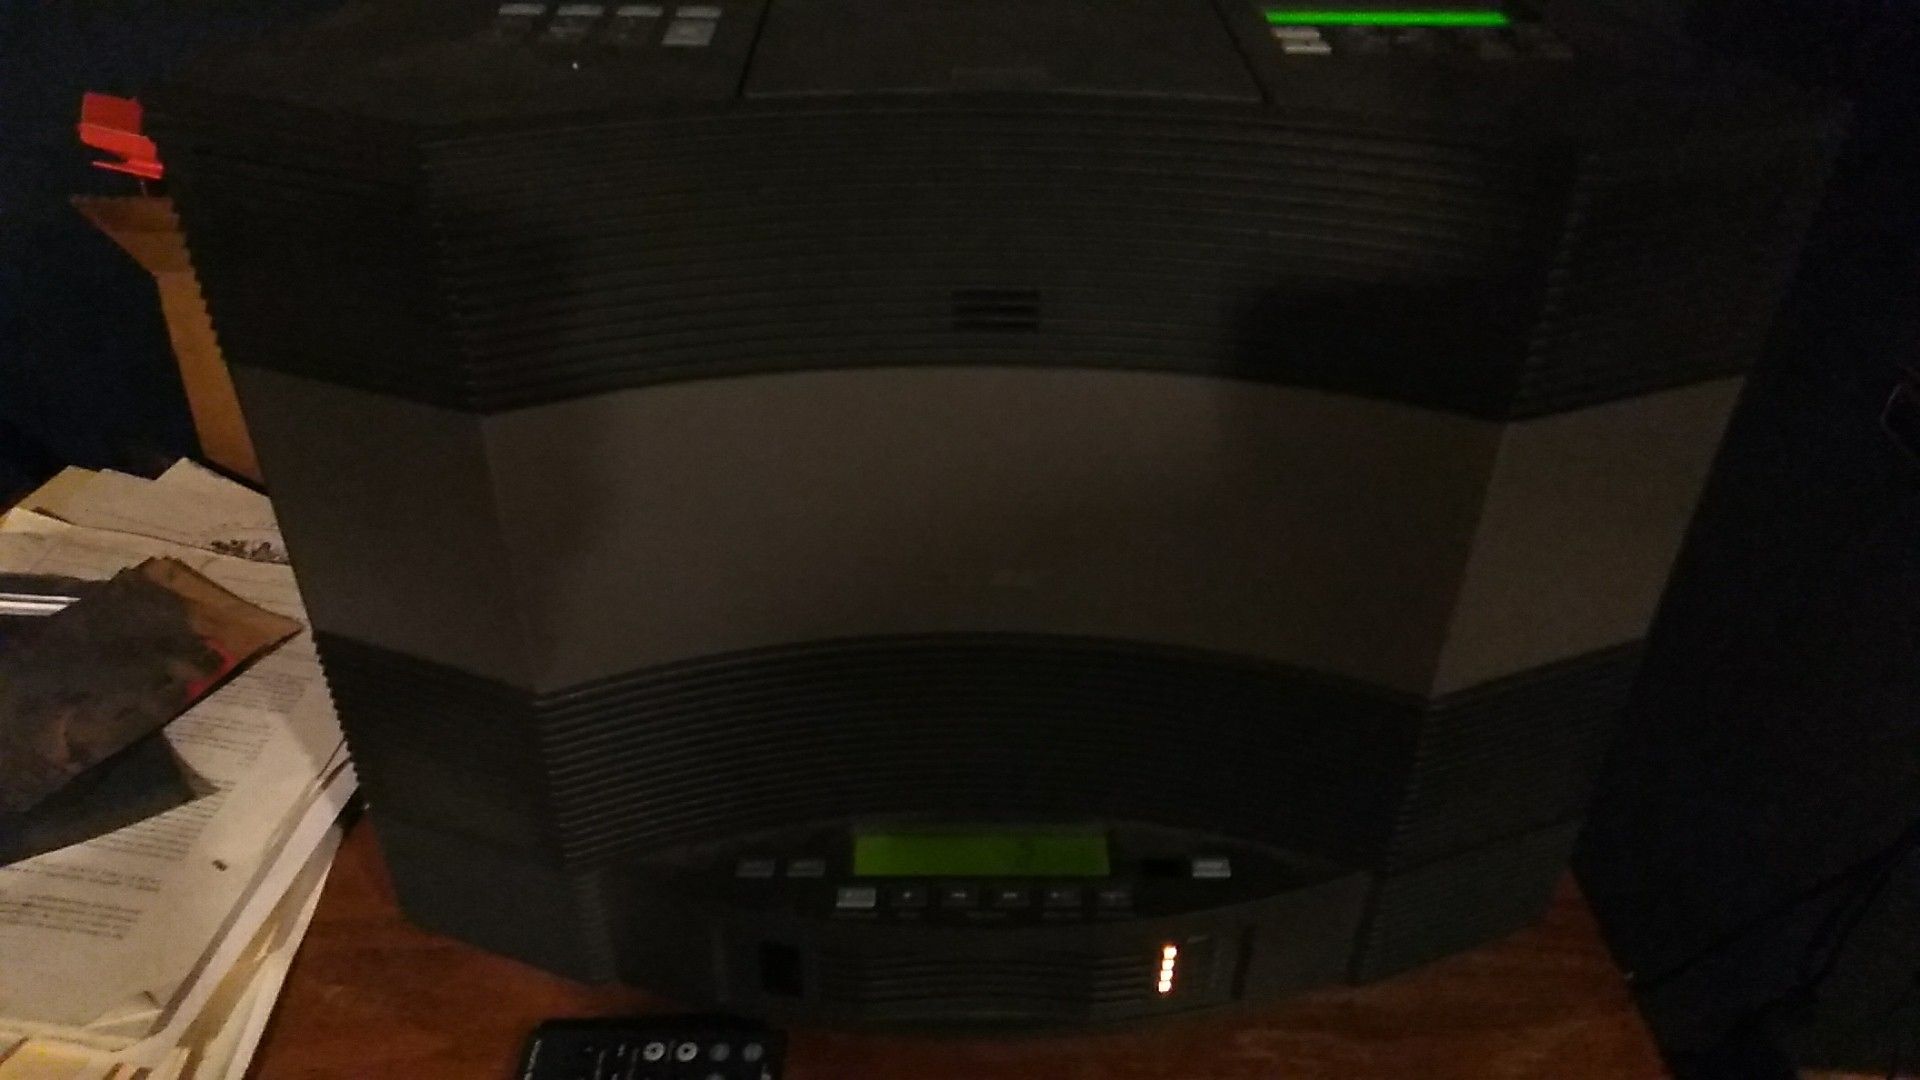 Bose Wave radio with CD changer